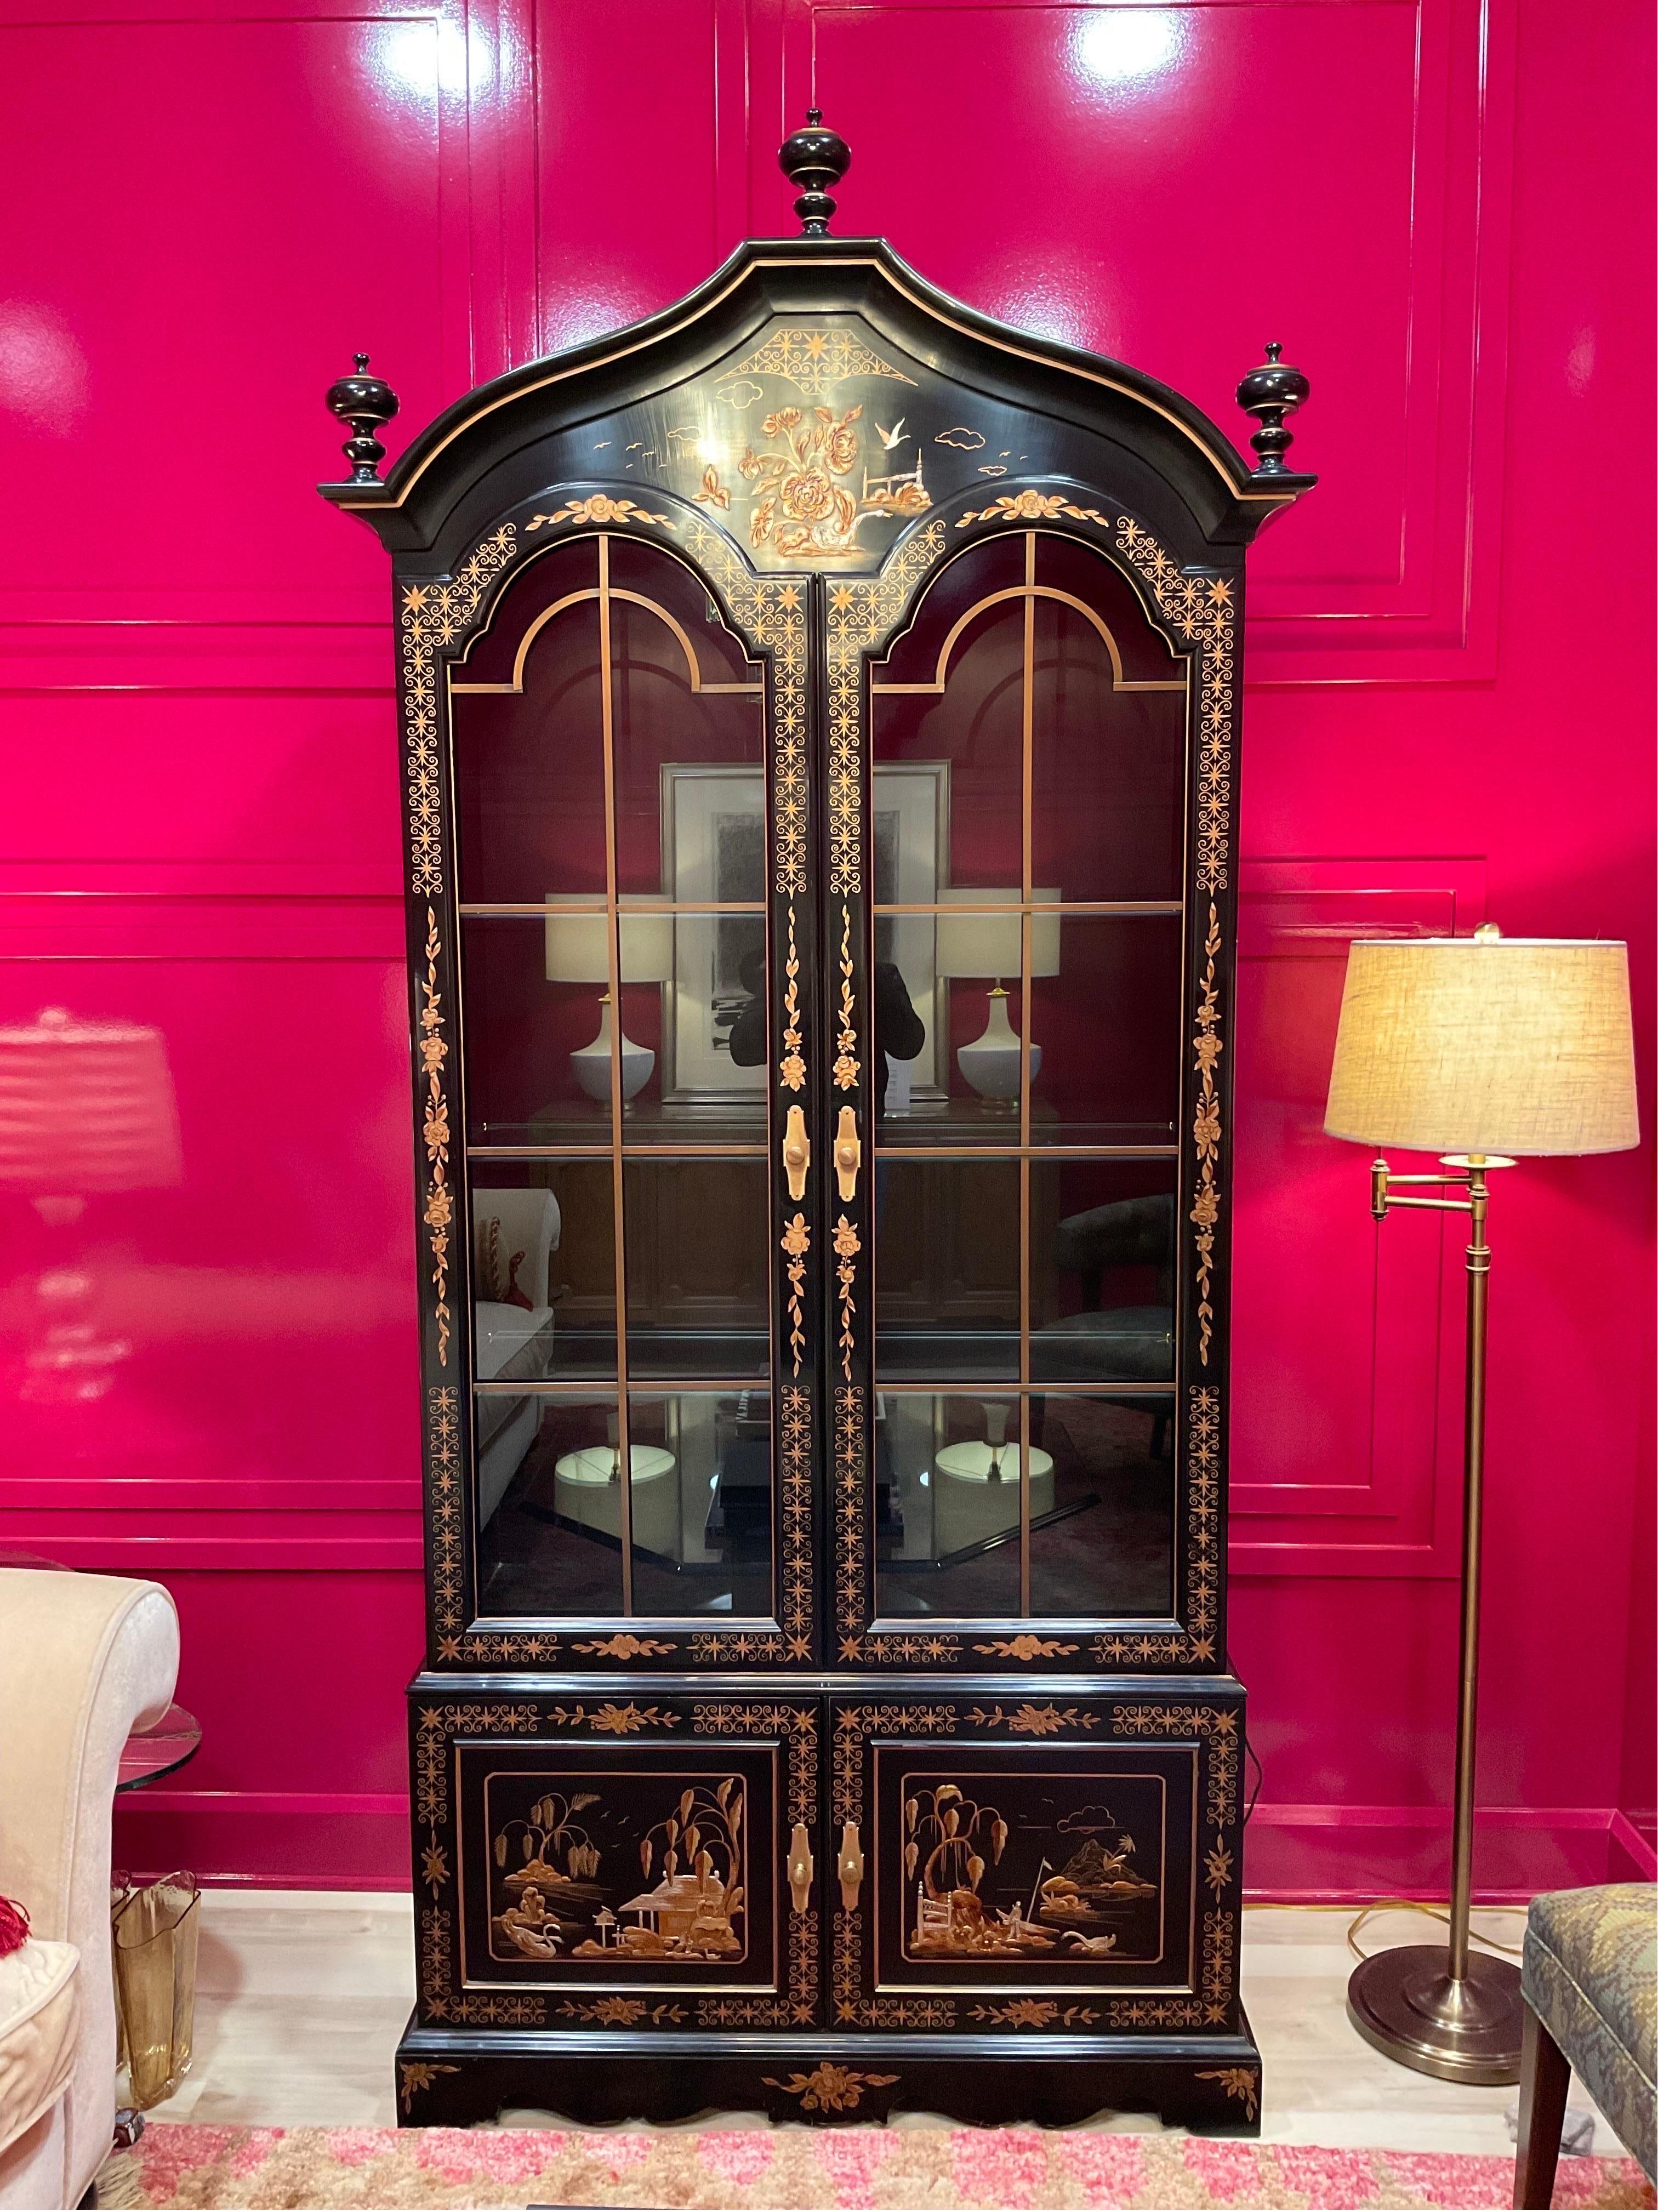 Uber Rare beauty from Hickory Furniture for their American Masterpiece line circa 1975-1989. Extraordinary in its intoxicating blend of Chinoiserie and Baroque influences. Spectacular raised painted scenes over a brilliant black lacquer finish. The